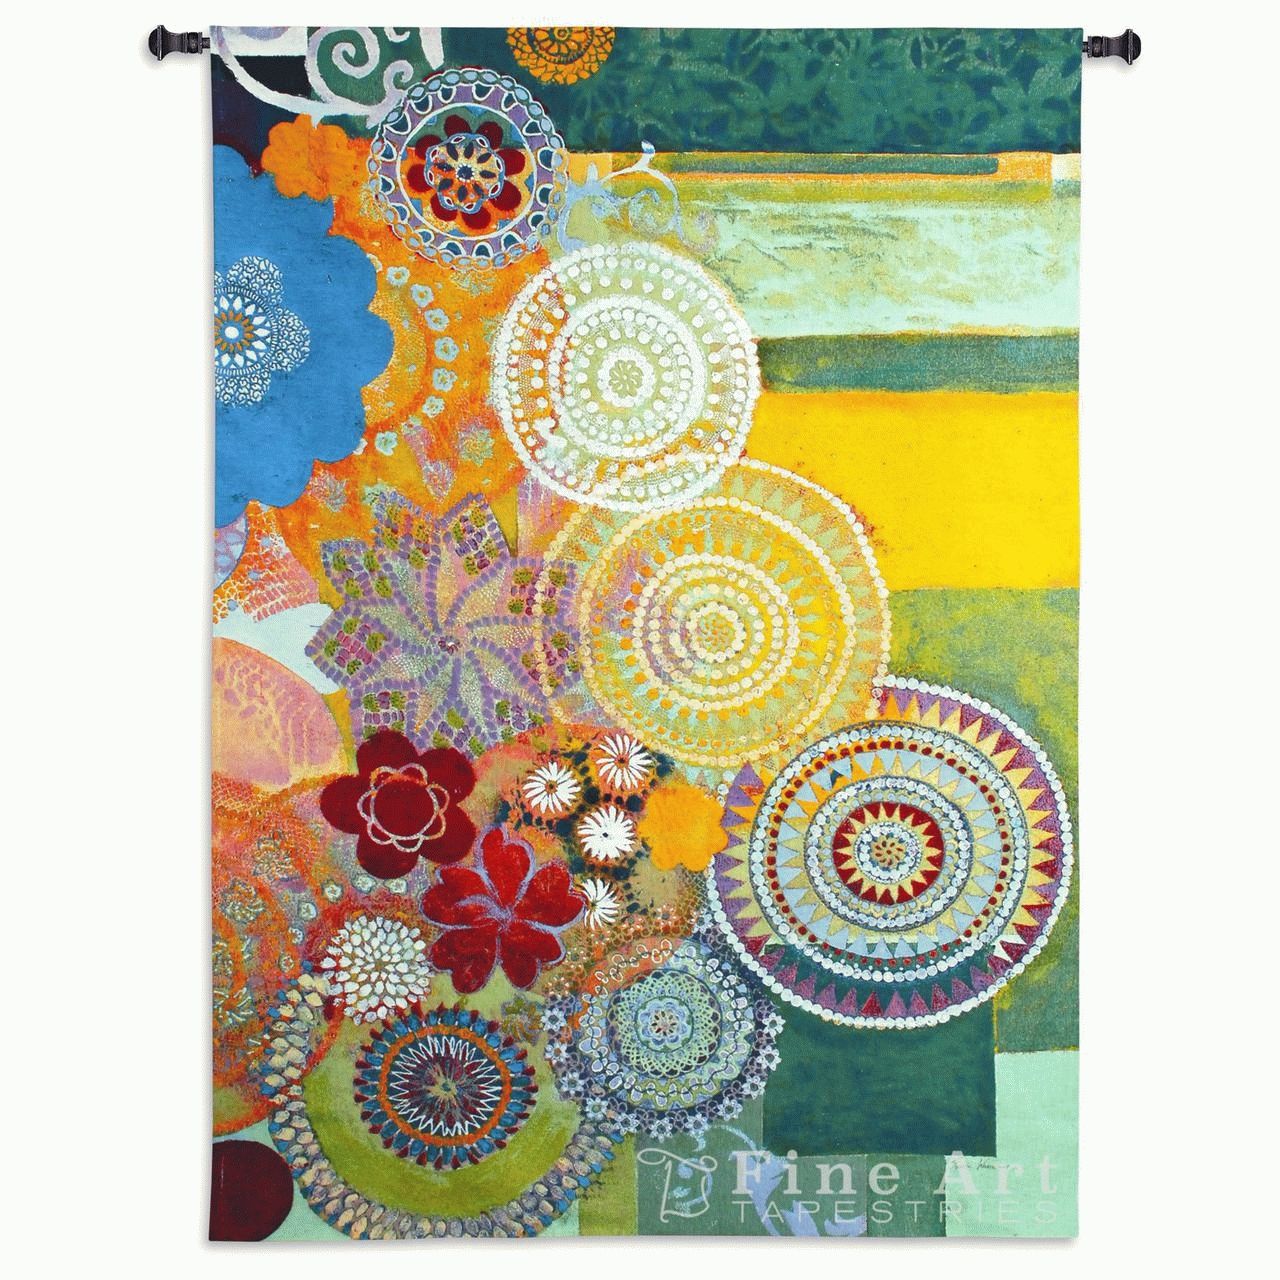 Lace Curve Tapestry Wall Hanging – Contemporary Abstract Design Regarding Most Popular Abstract Textile Wall Art (View 15 of 15)